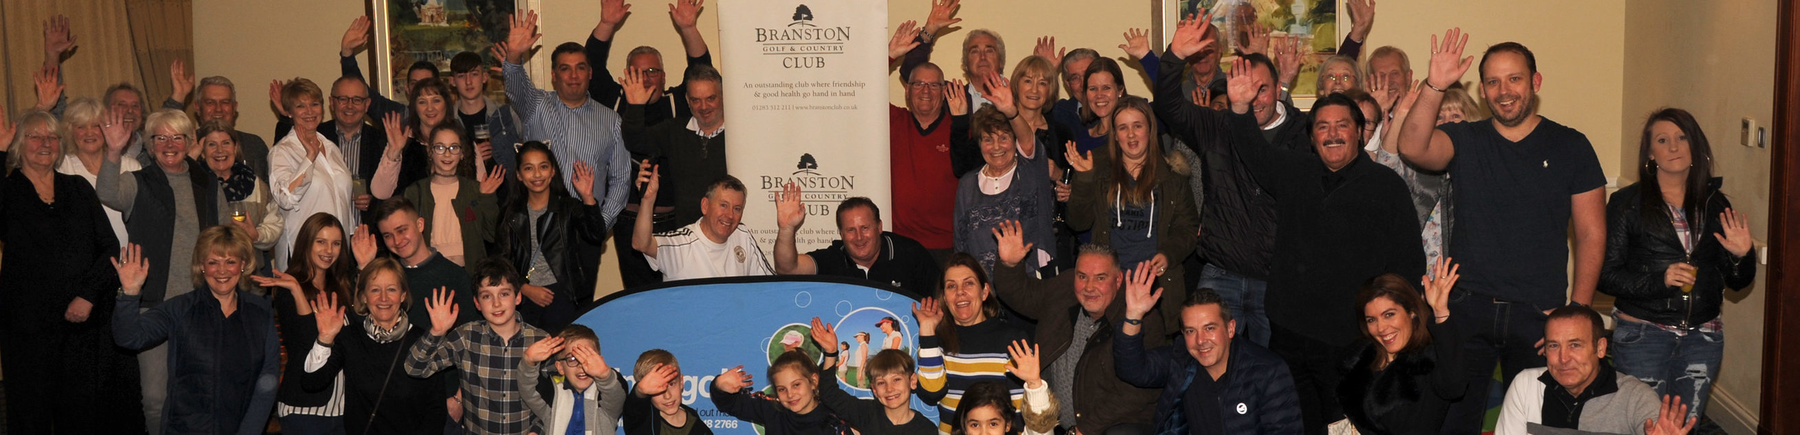 Branston’s Indoor Golf Challenge attracted record entries. Golf Professional Steve Hadfield & Paul Hebdon are at the base of the Branston banner.